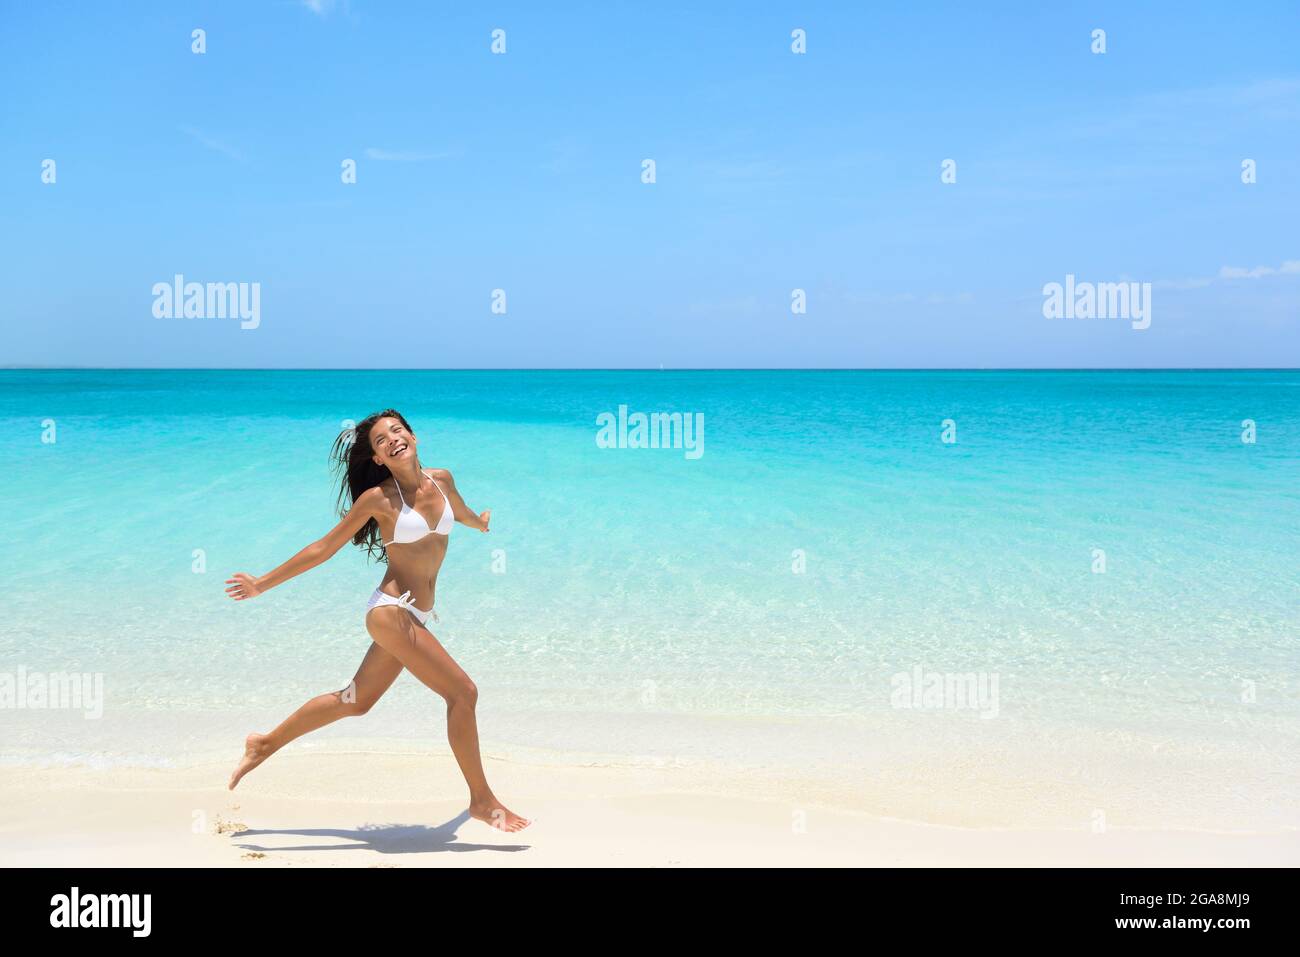 Carefree Woman Jumping On Beach during Summer Stock Photo